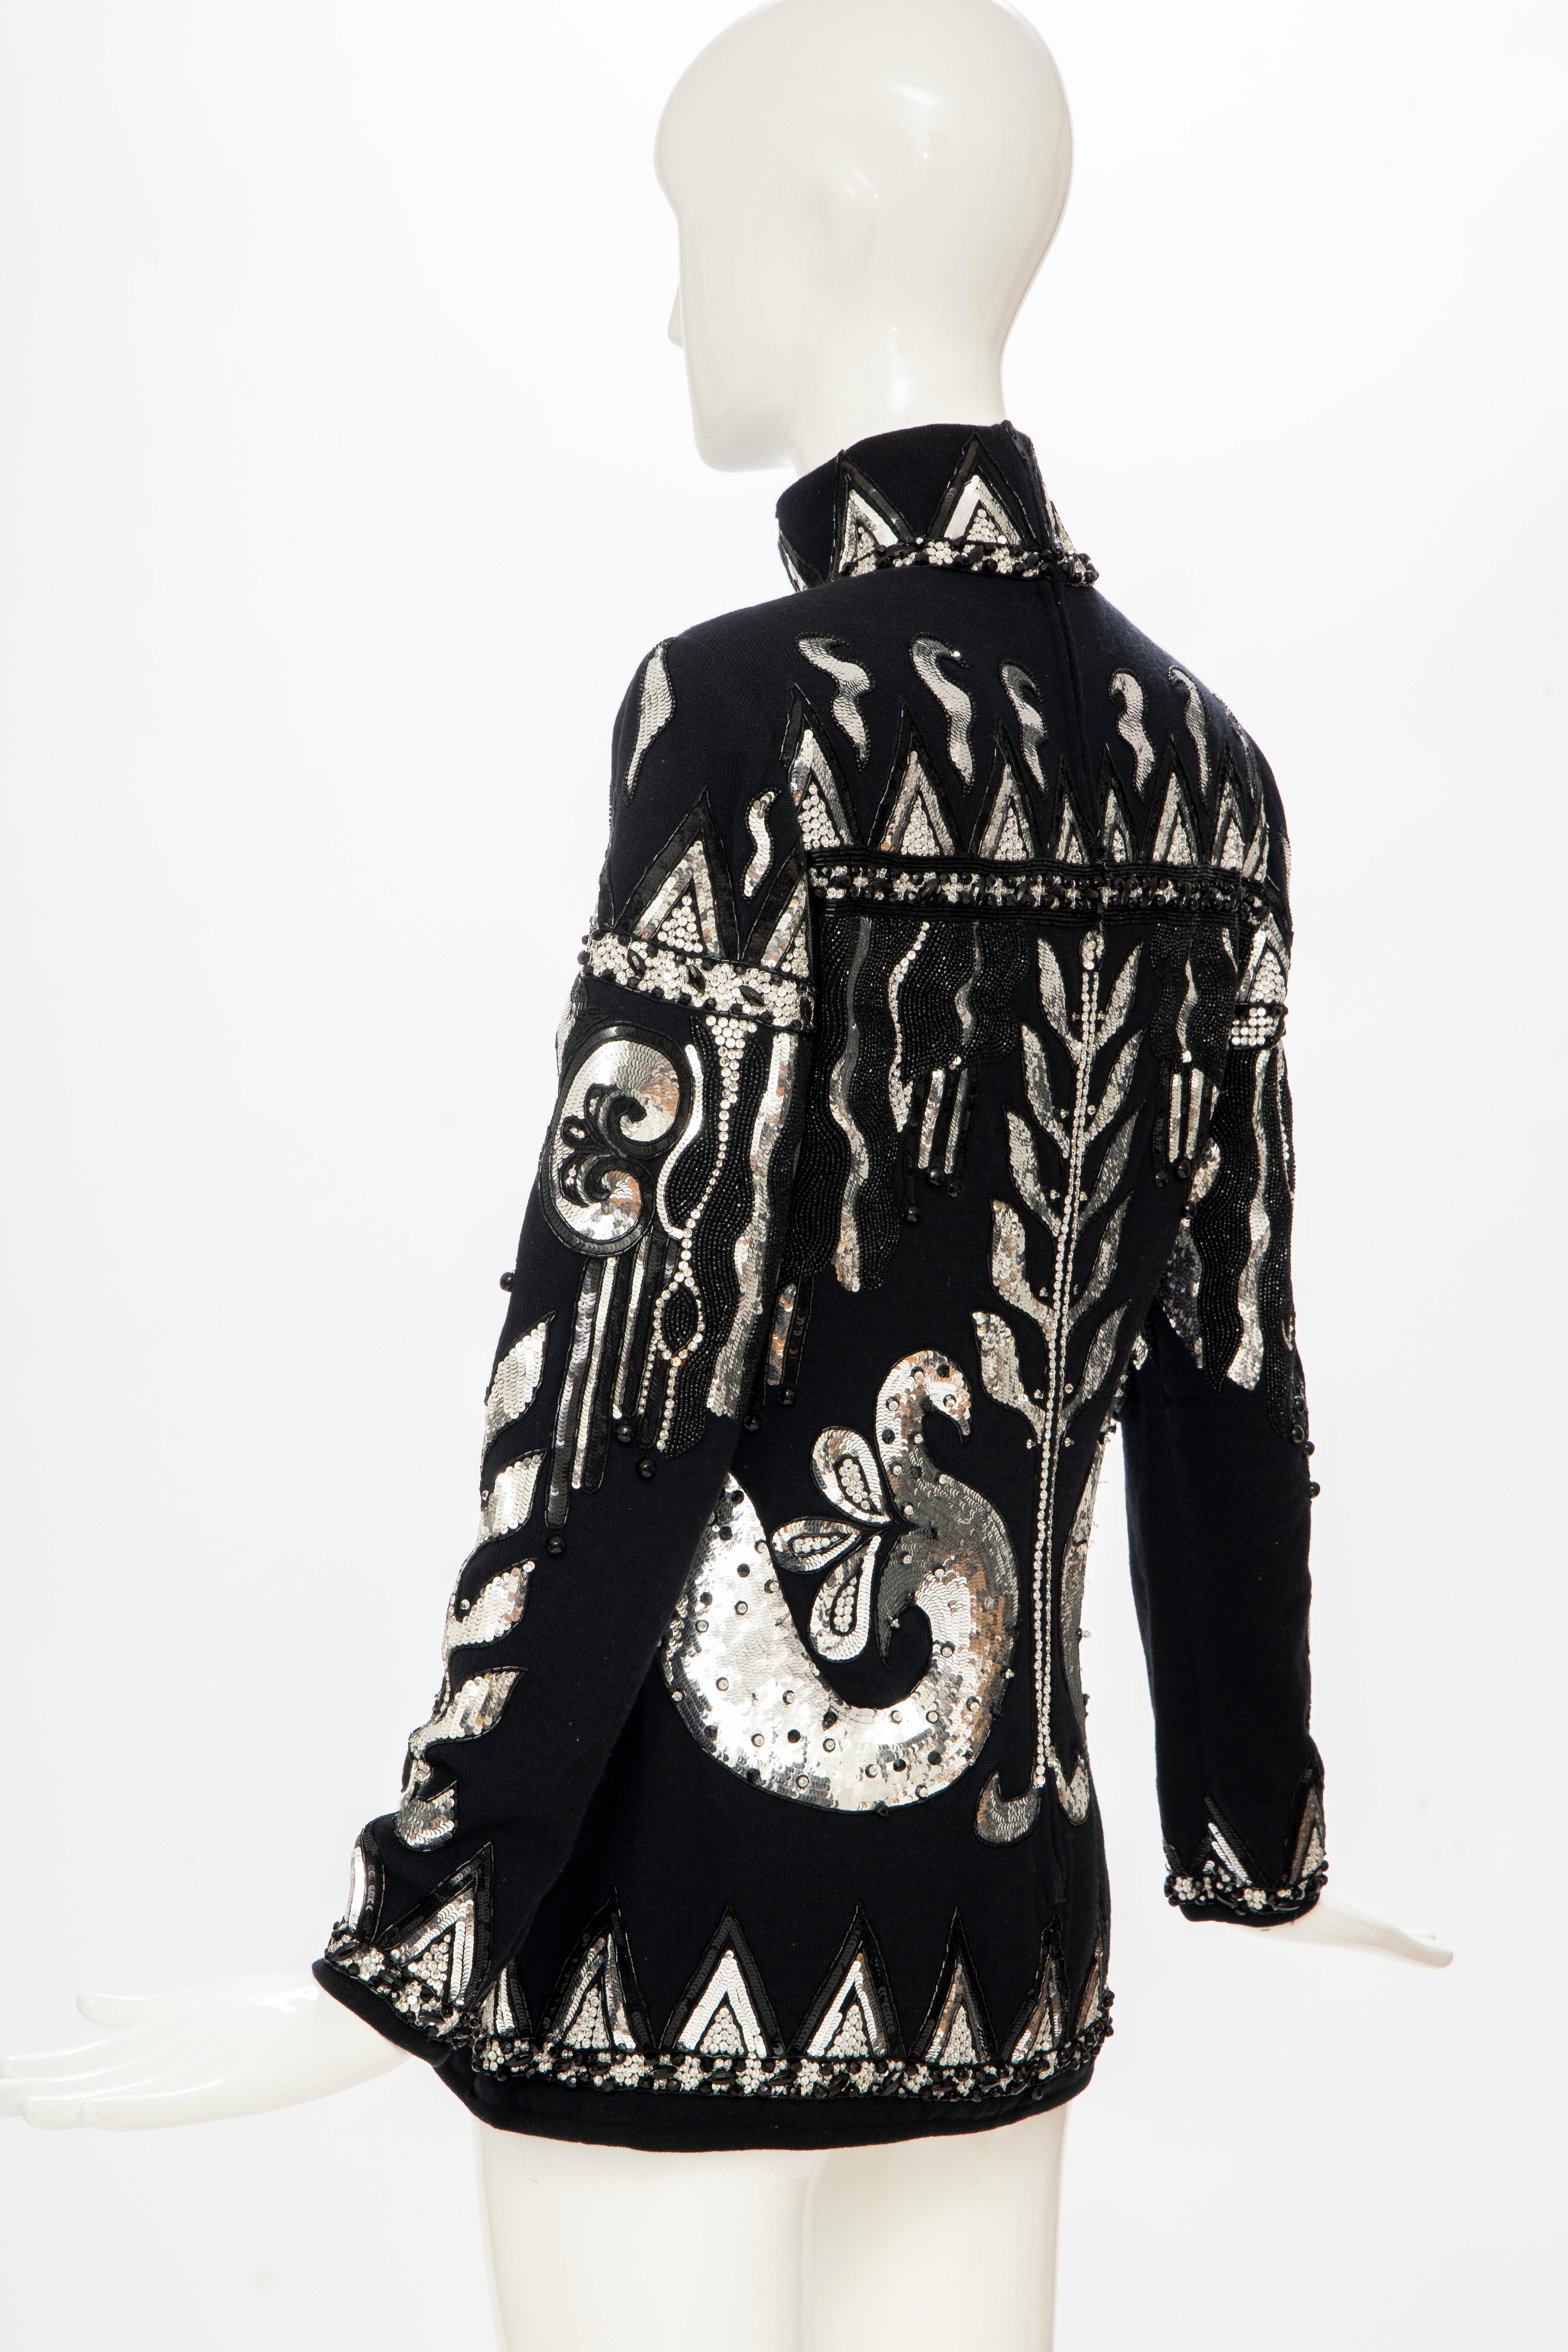 Valentino Boutique Black Wool Embroidered Silver Sequins Sweater, Fall 1989-90 5